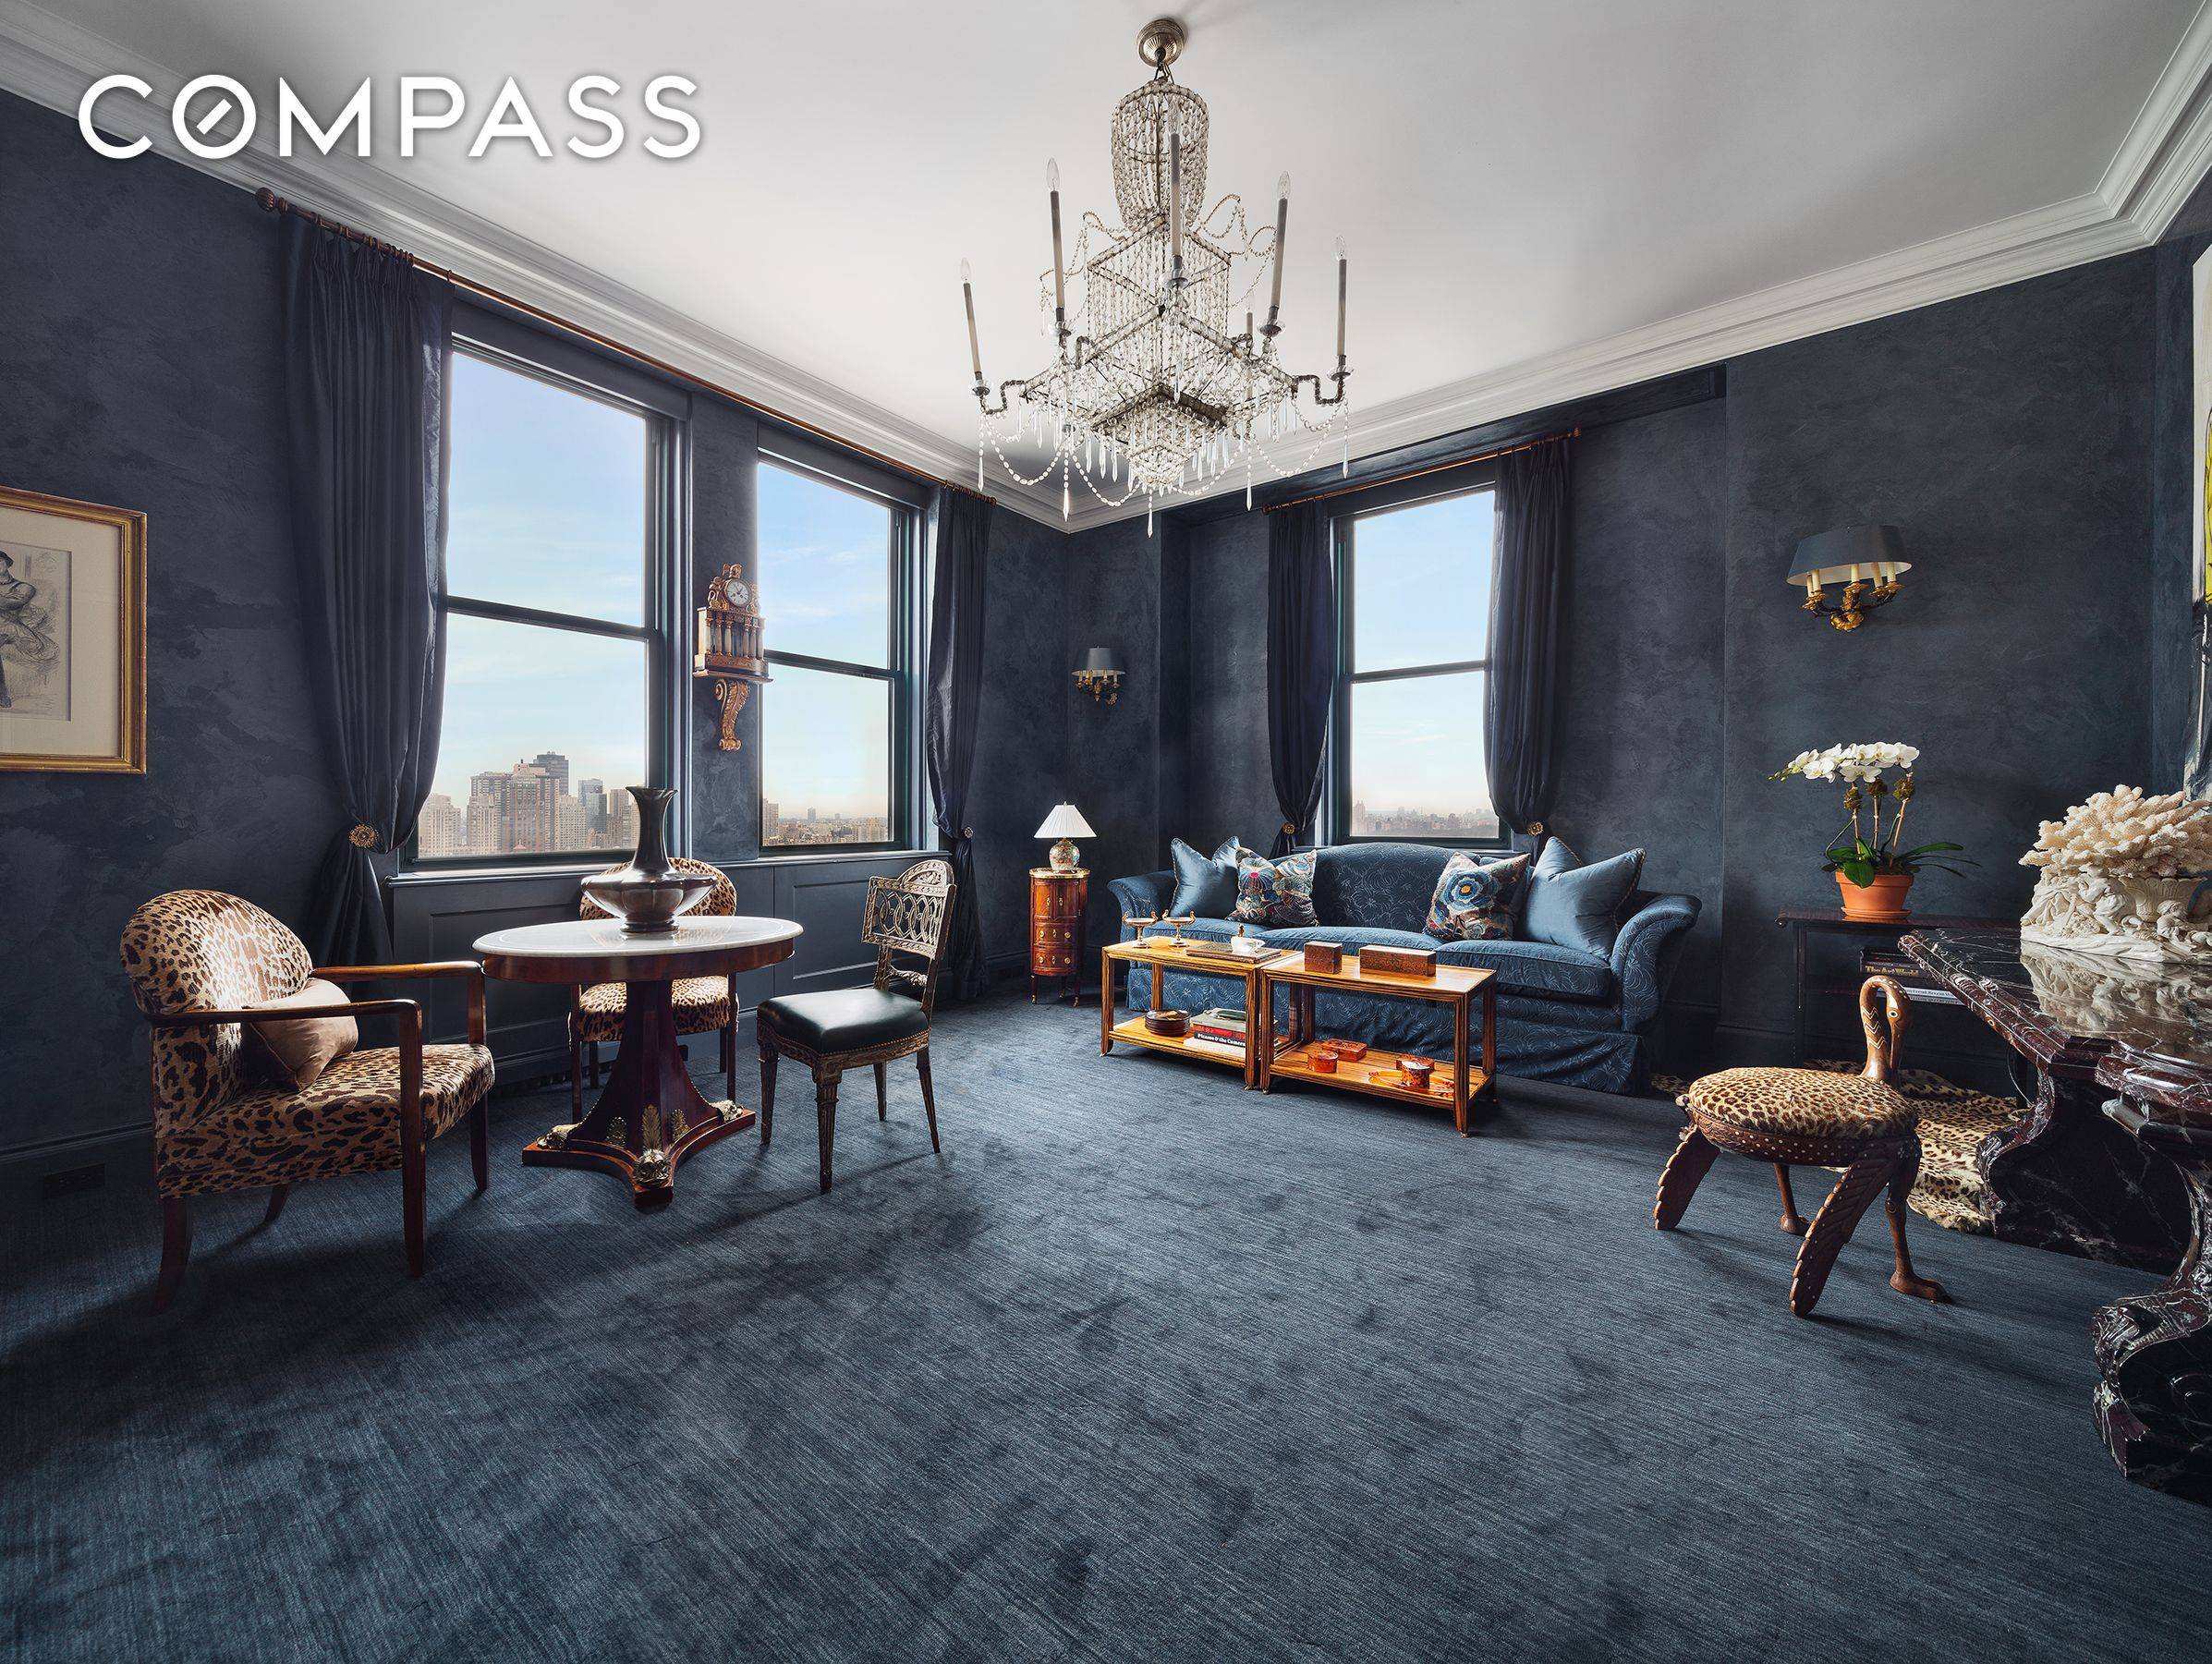 Brilliant light and panoramic park and city views from every room at one of the finest addresses in Manhattan.